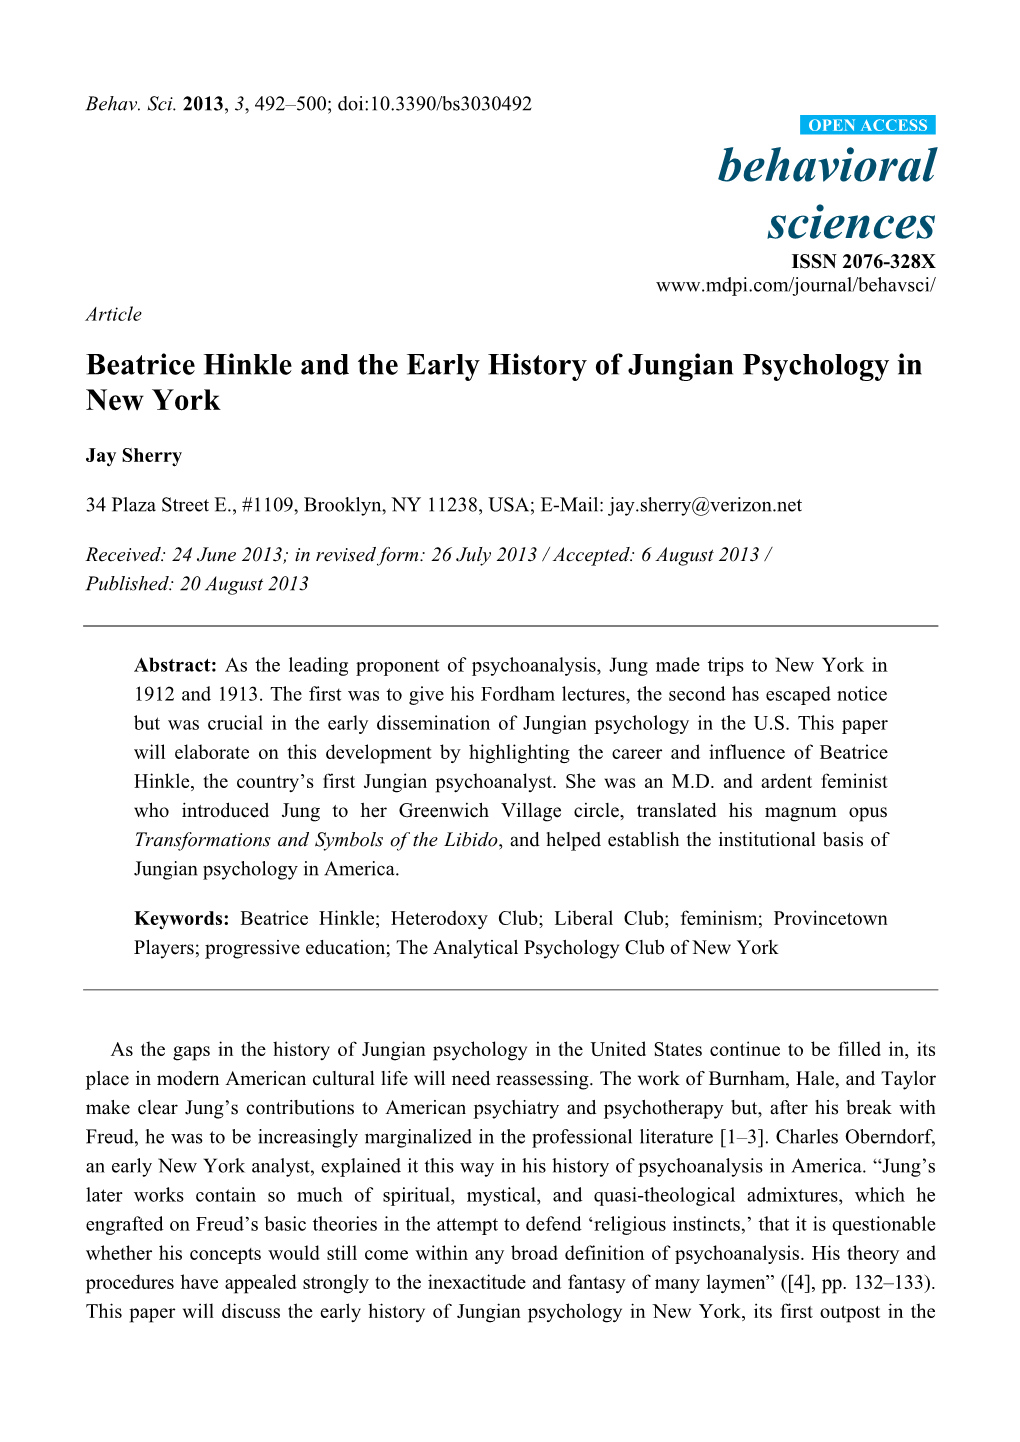 Beatrice Hinkle and the Early History of Jungian Psychology in New York